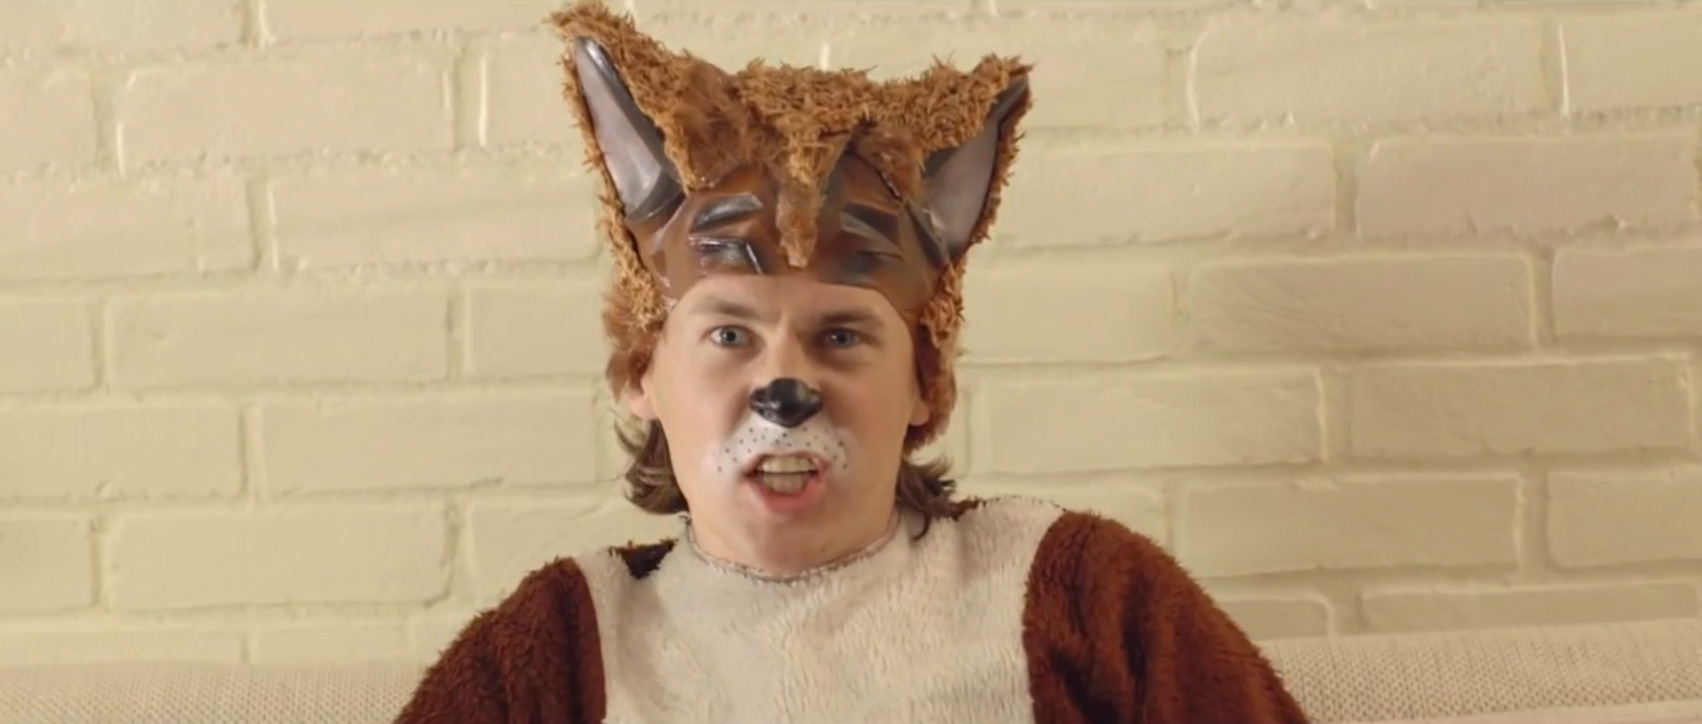 What Does the Fox Say in the Lyrics to the Ylvis Music Video The Fox